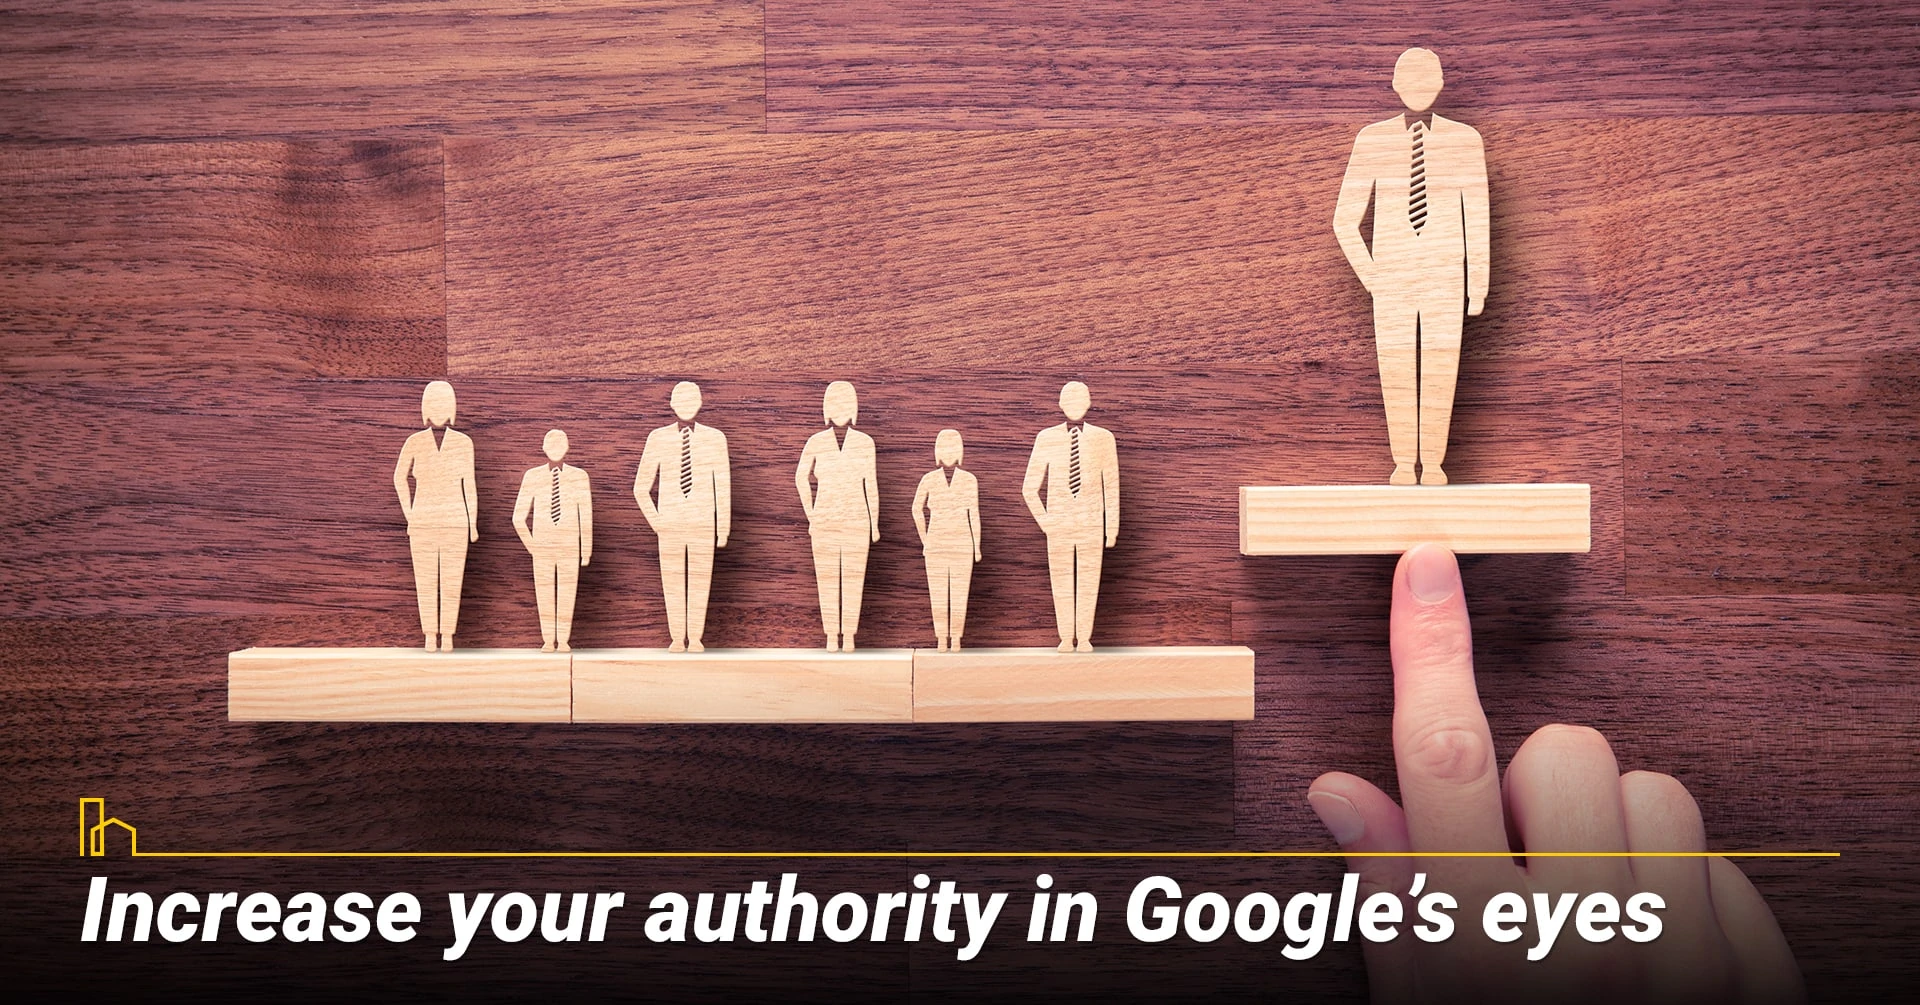 Increase your authority in Google’s eyes, improve your ranking in Google